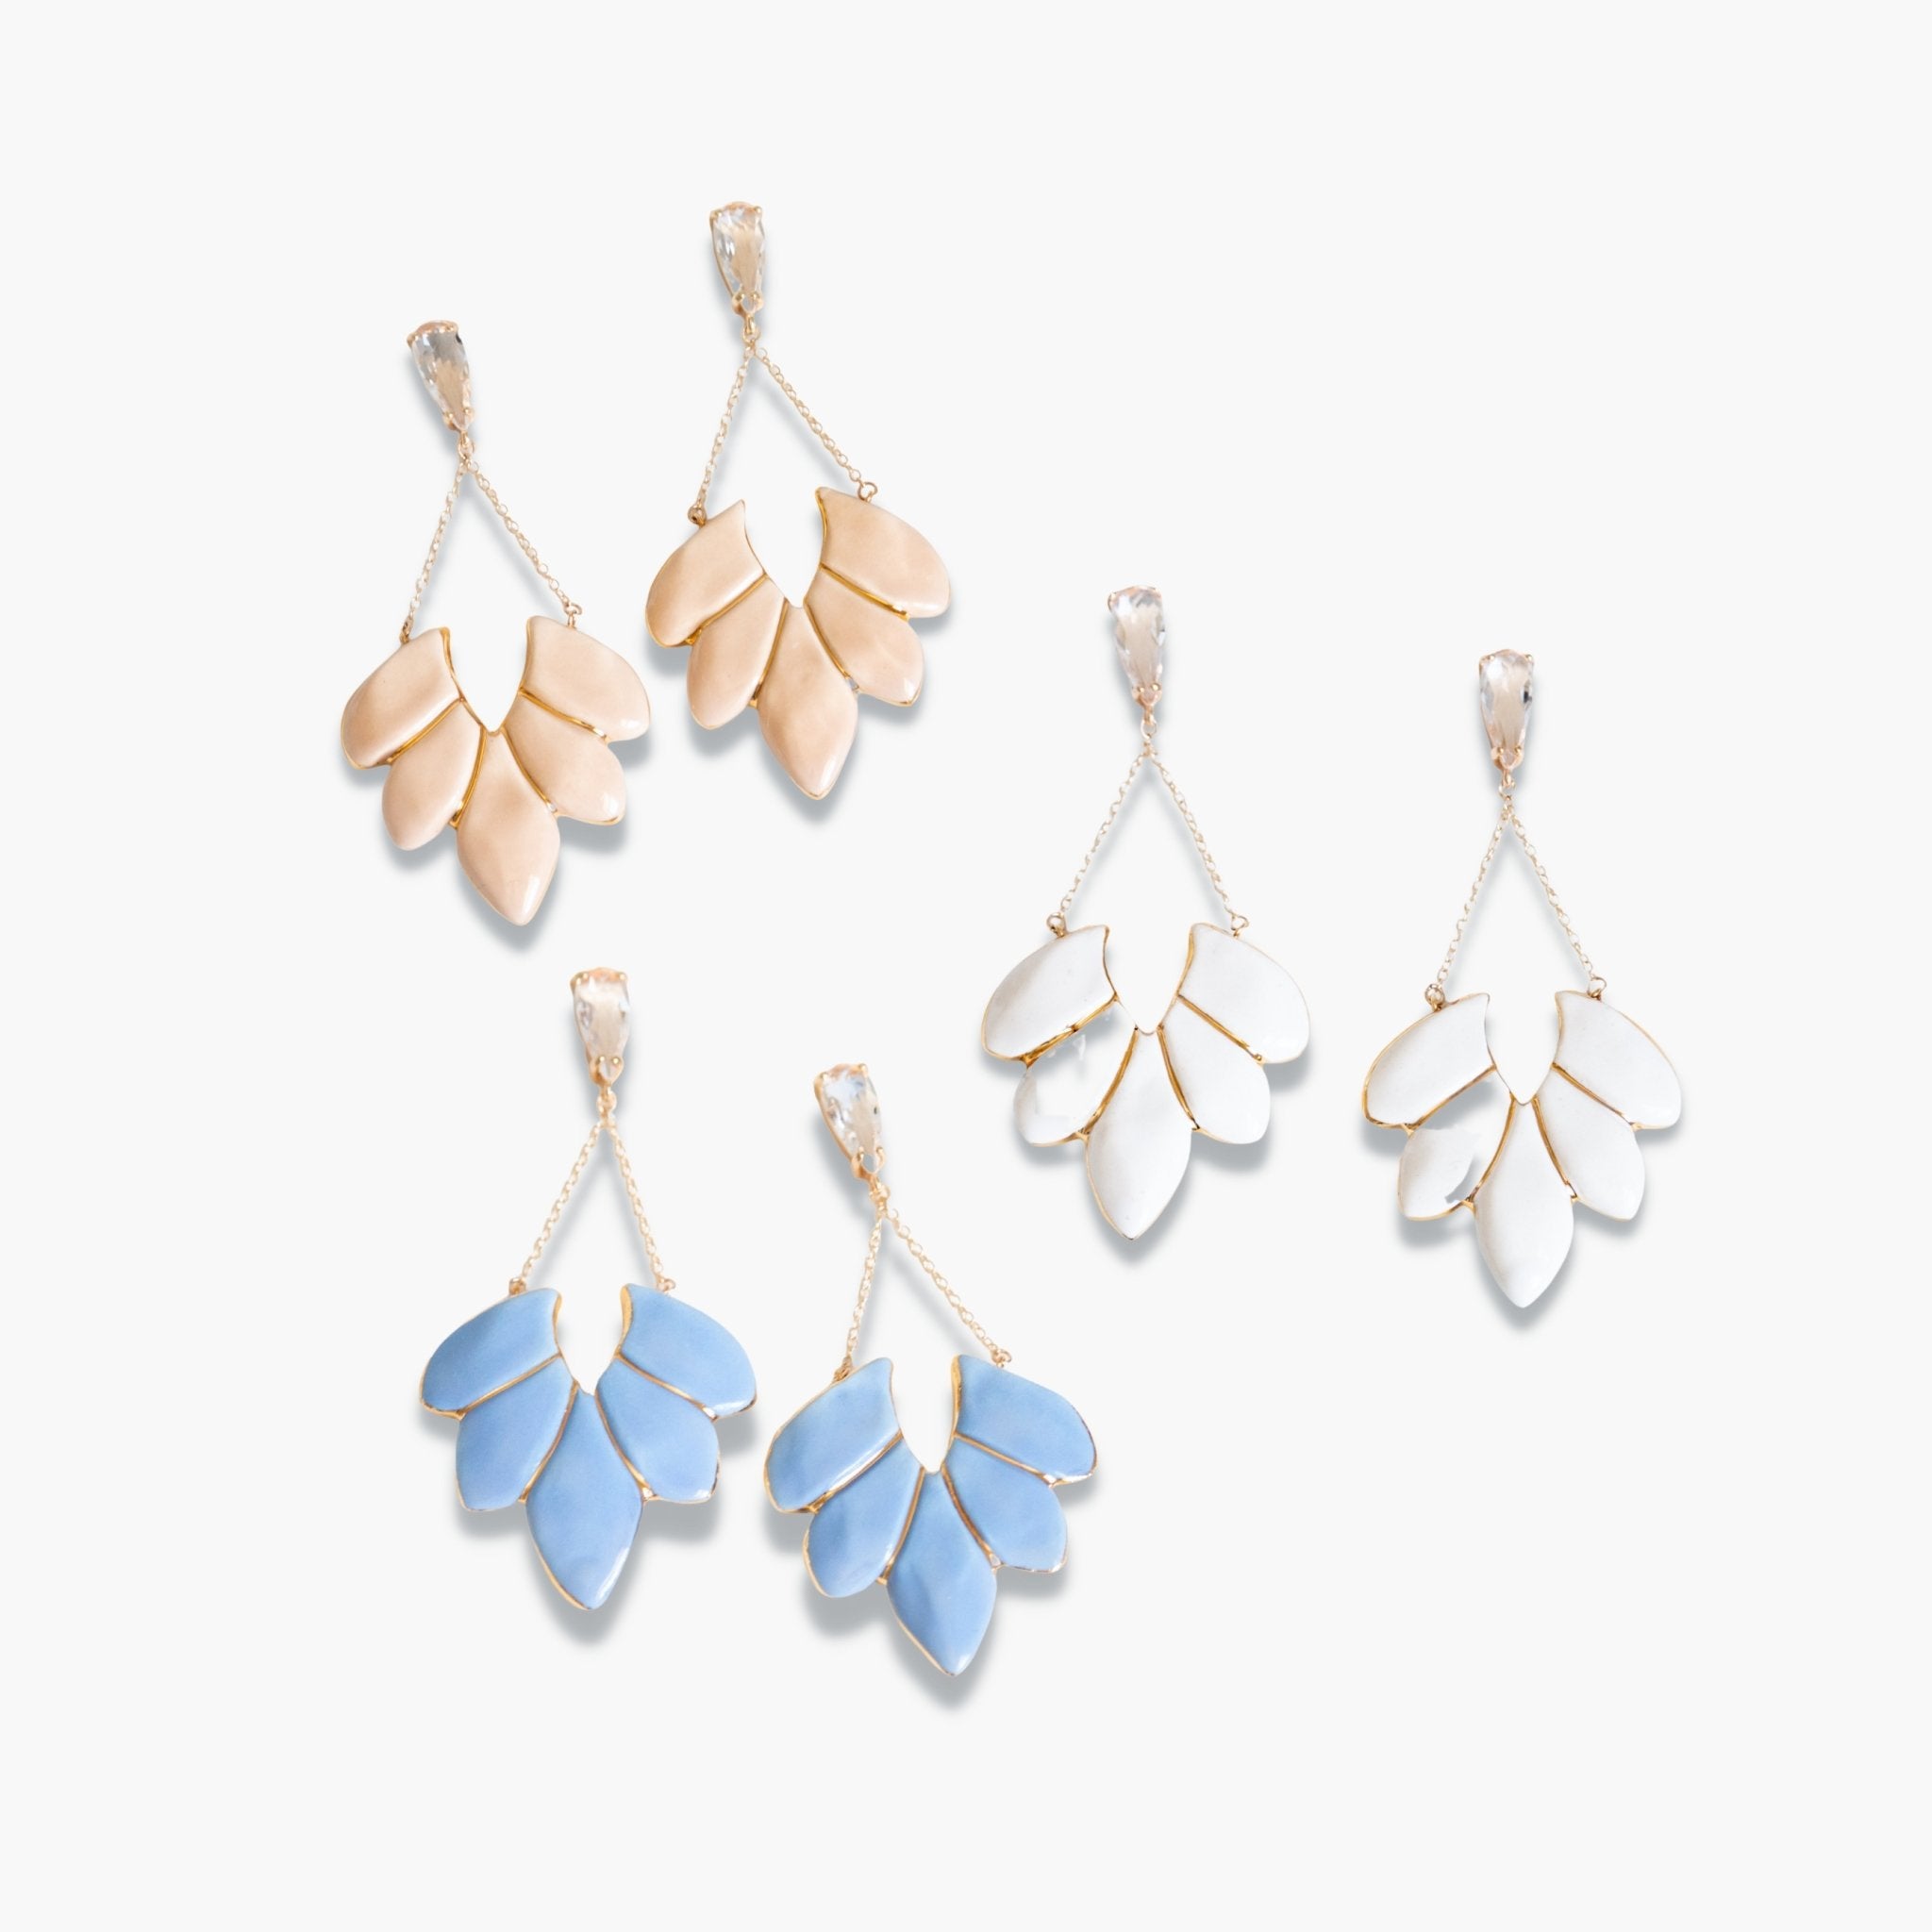 veuve-statement-earring-by-susan-gordon-pottery-accessories-jewelry-earrings-georgia-kate